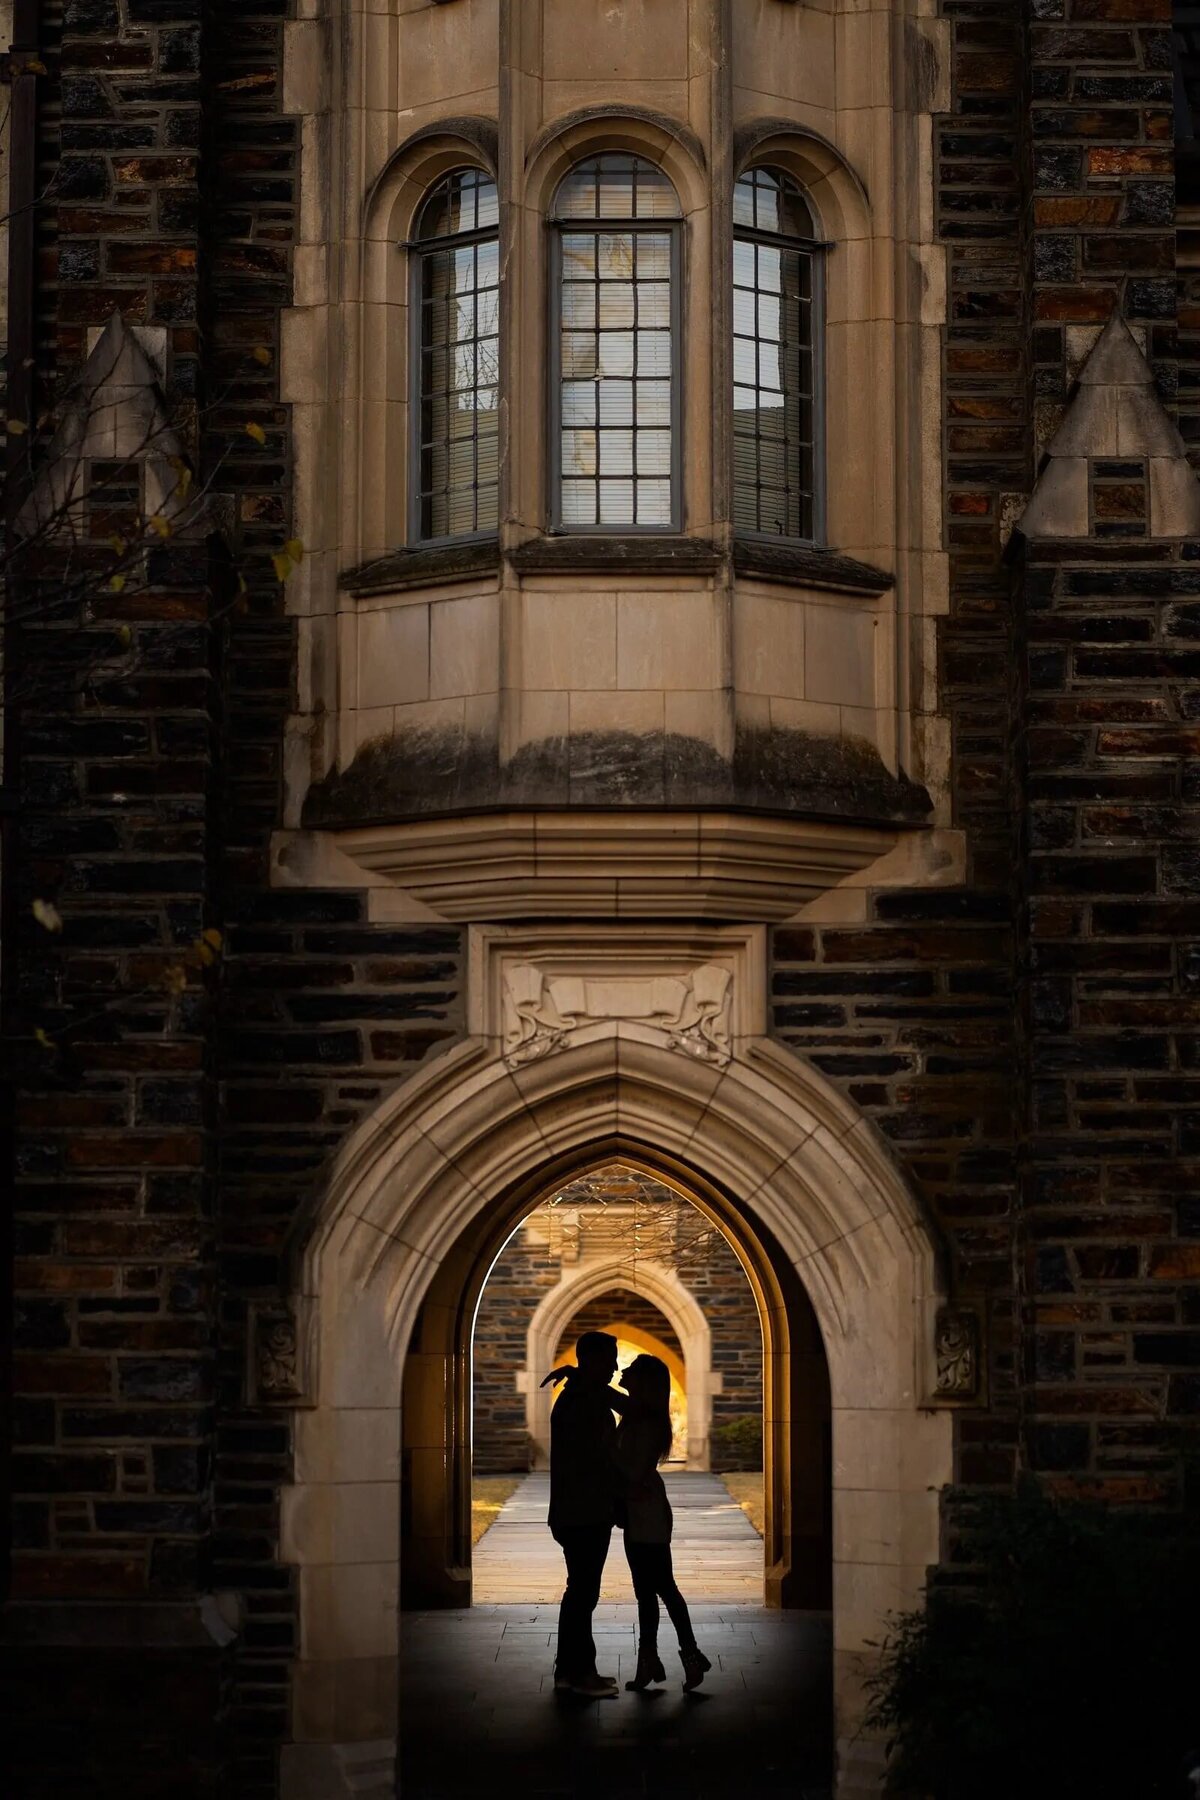 A couple stands in a dimly lit archway, their silhouetted figures set against the architectural beauty of the background